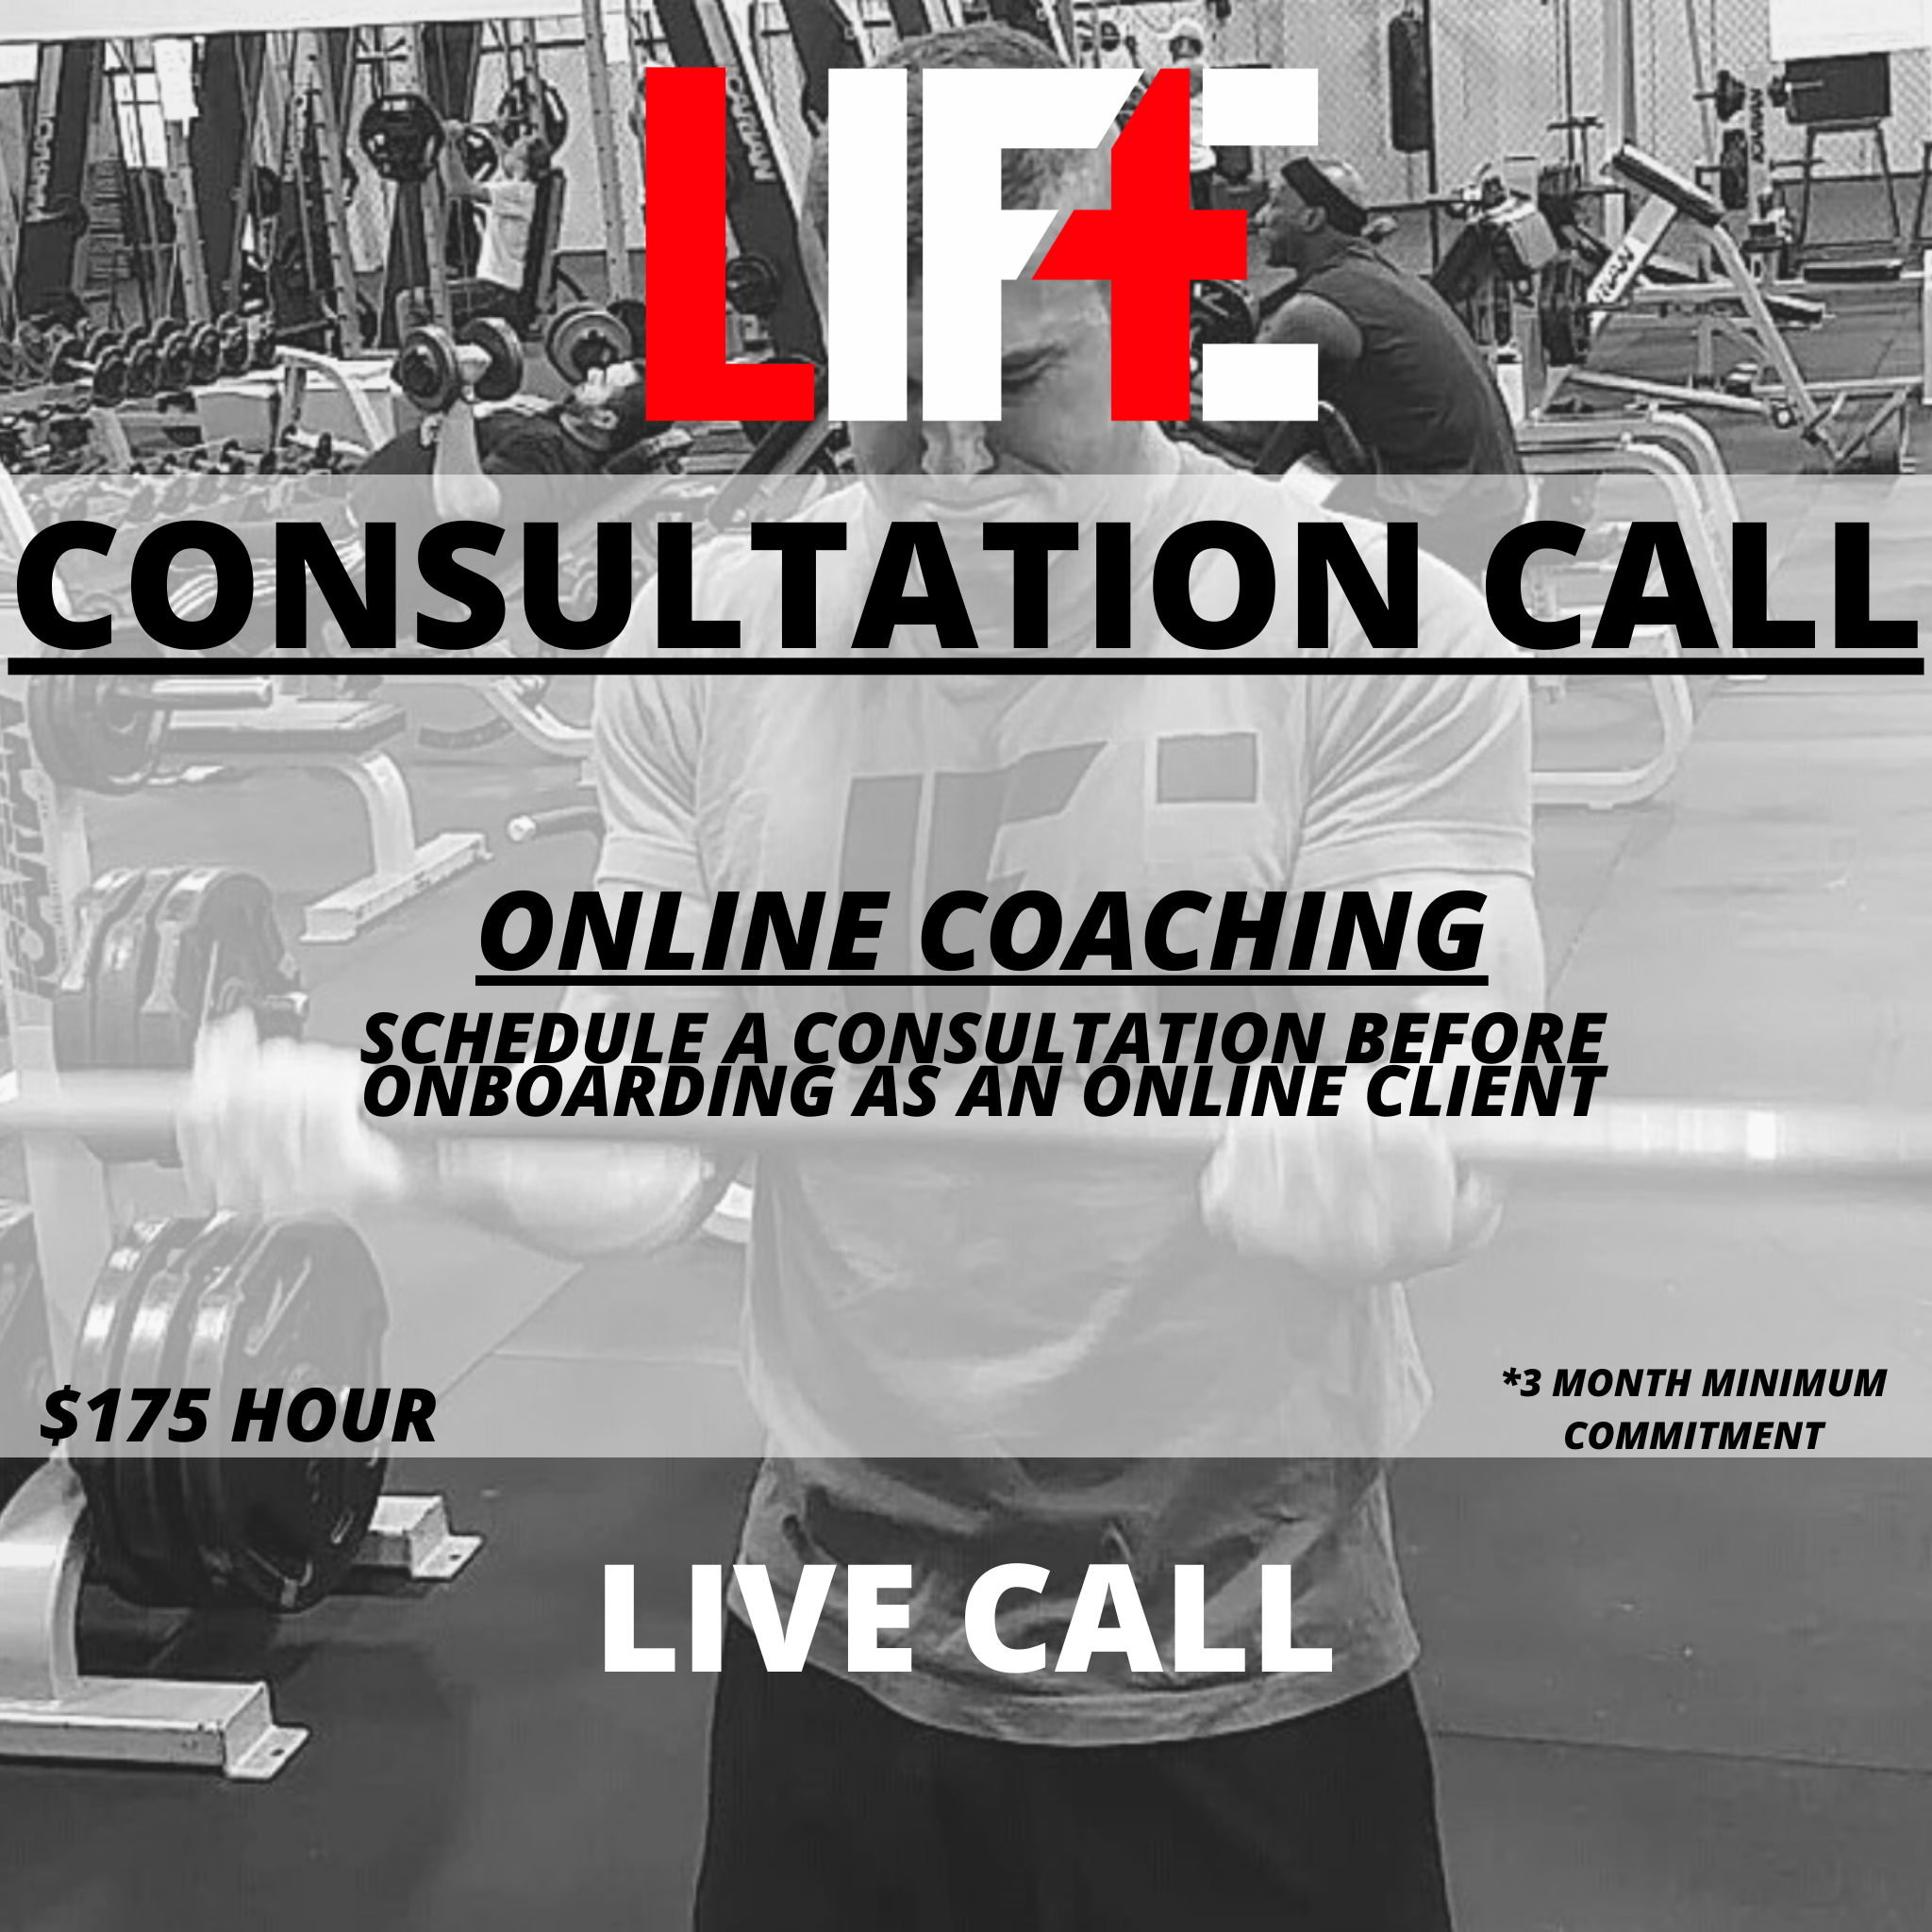 Video Consultation Call - 60 Minutes